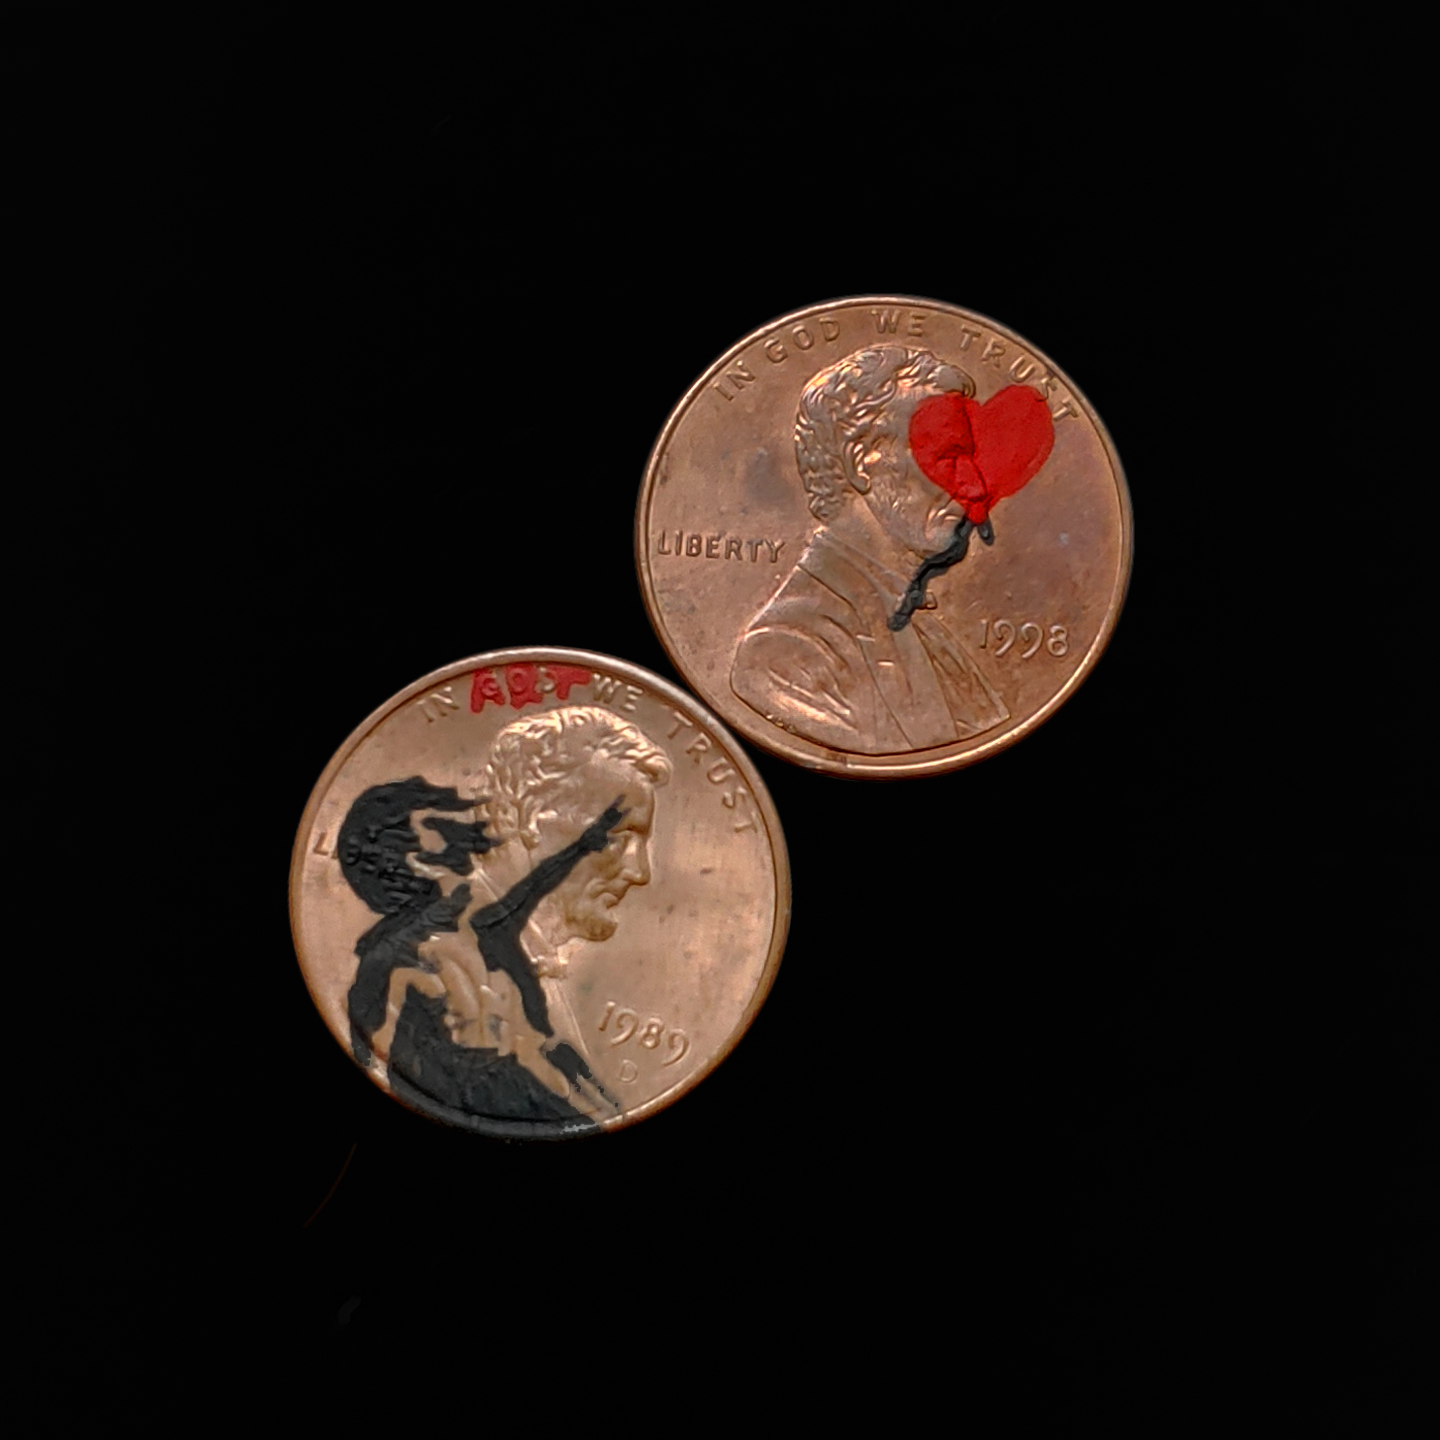 Brown pennies with paintings on them